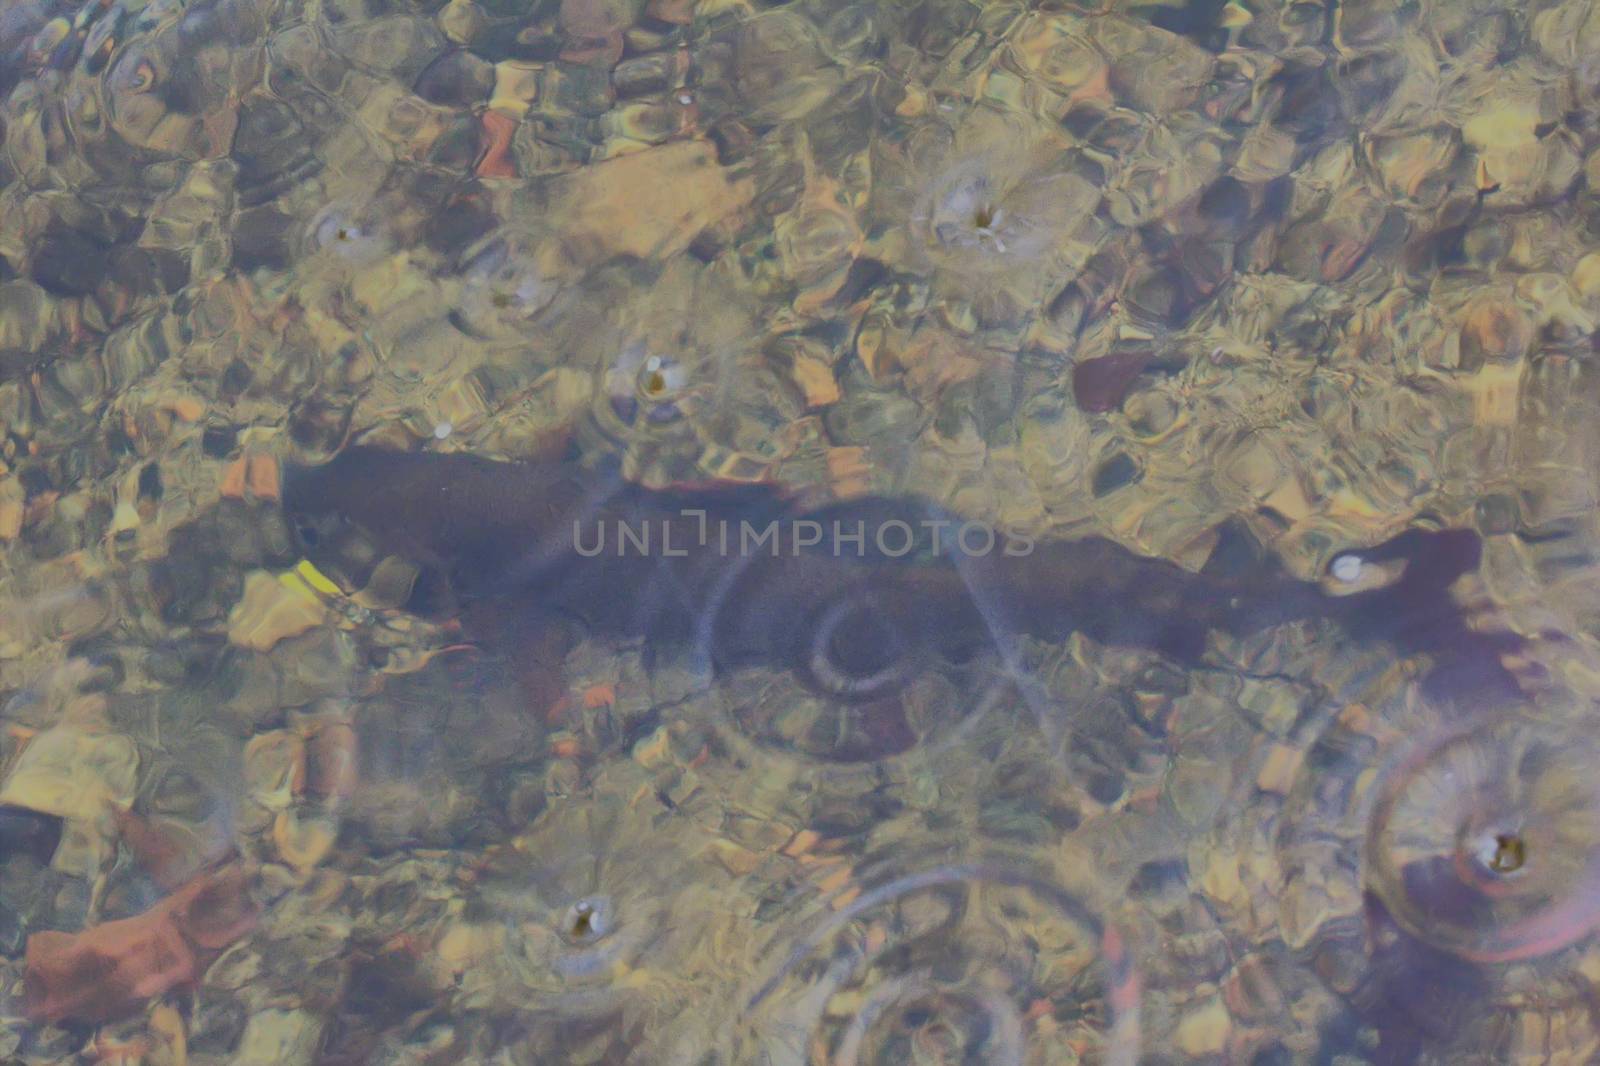 grayling in river underwater caught on a spinner